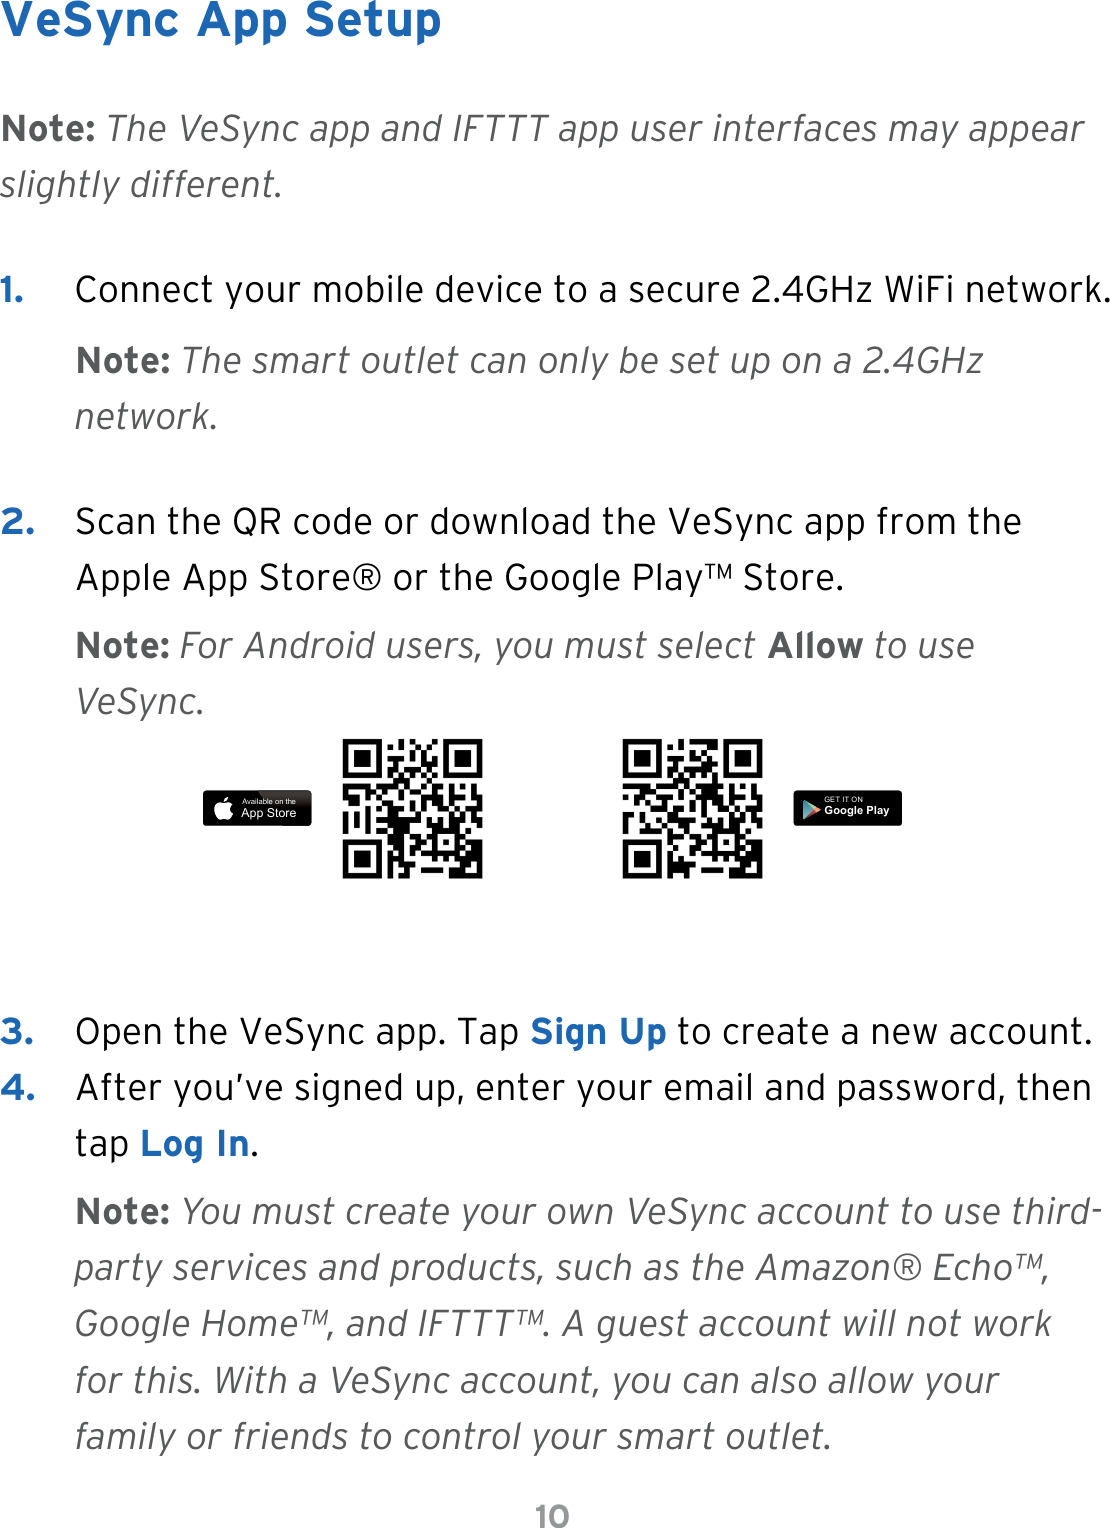 10VeSync App Setup1.  Connect your mobile device to a secure 2.4GHz WiFi network.Note: The smart outlet can only be set up on a 2.4GHz network.Note: The VeSync app and IFTTT app user interfaces may appear slightly different.Note: For Android users, you must select Allow to use VeSync.Note: You must create your own VeSync account to use third-party services and products, such as the Amazon® Echo™, Google Home™, and IFTTT™. A guest account will not work for this. With a VeSync account, you can also allow your family or friends to control your smart outlet.2.  Scan the QR code or download the VeSync app from the Apple App Store® or the Google Play™ Store.3.  Open the VeSync app. Tap Sign Up to create a new account. 4.  After you’ve signed up, enter your email and password, then tap Log In.Available on theApp StoreGET IT ONGoogle Play